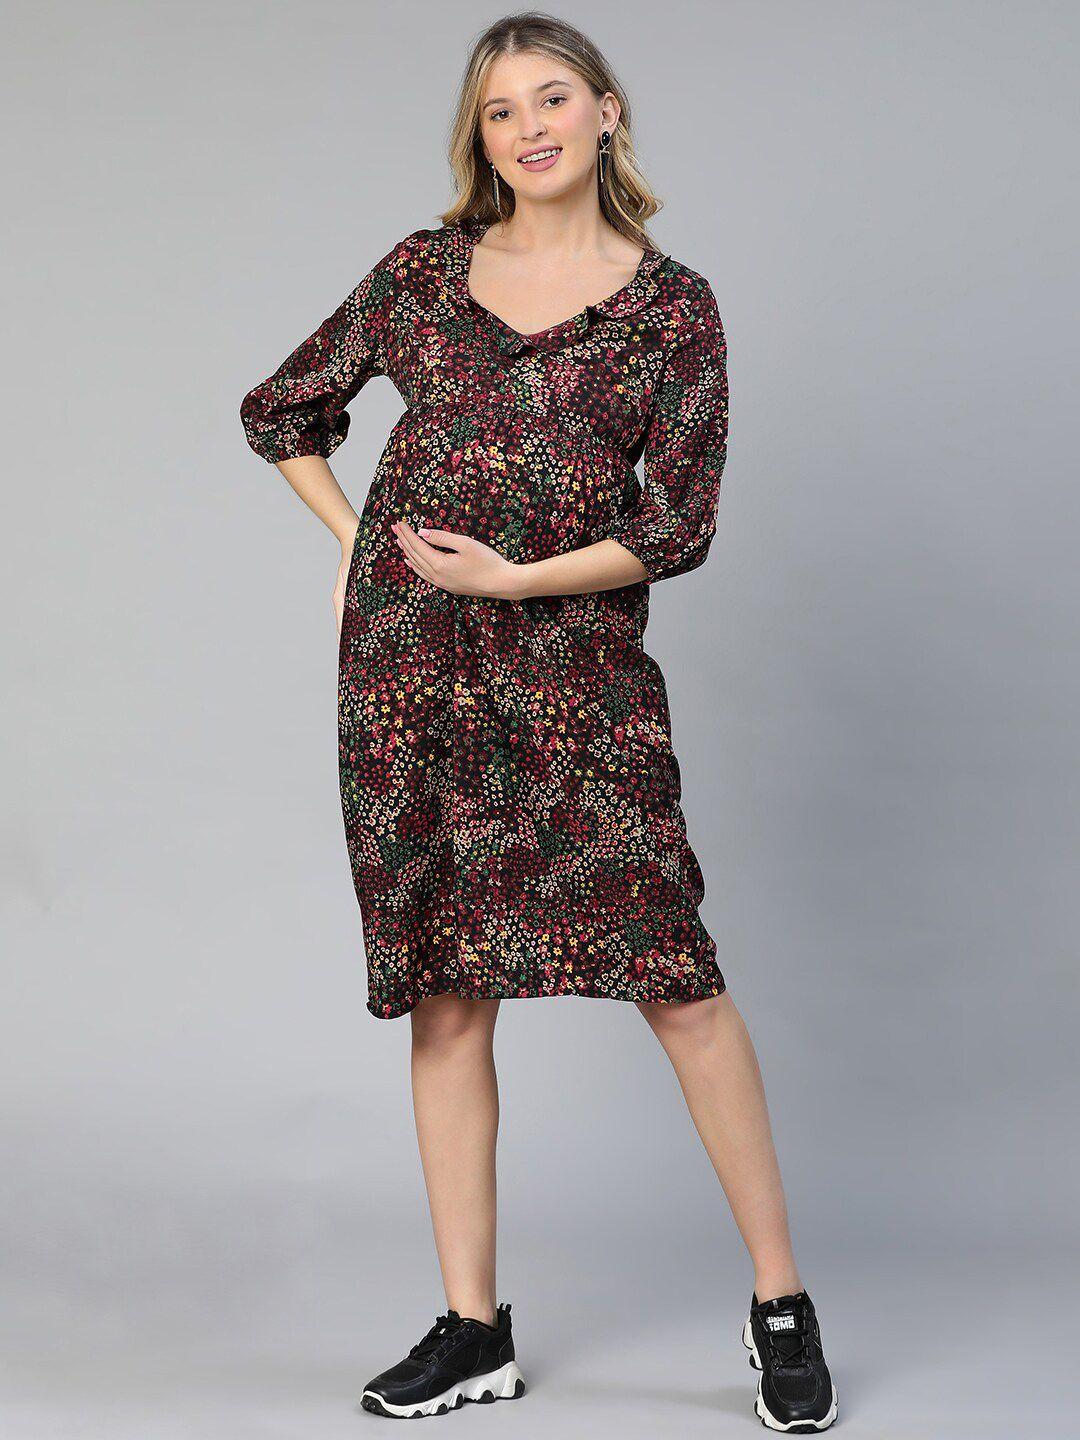 oxolloxo-floral-printed-v-neck-ruffled-crepe-maternity-a-line-dress